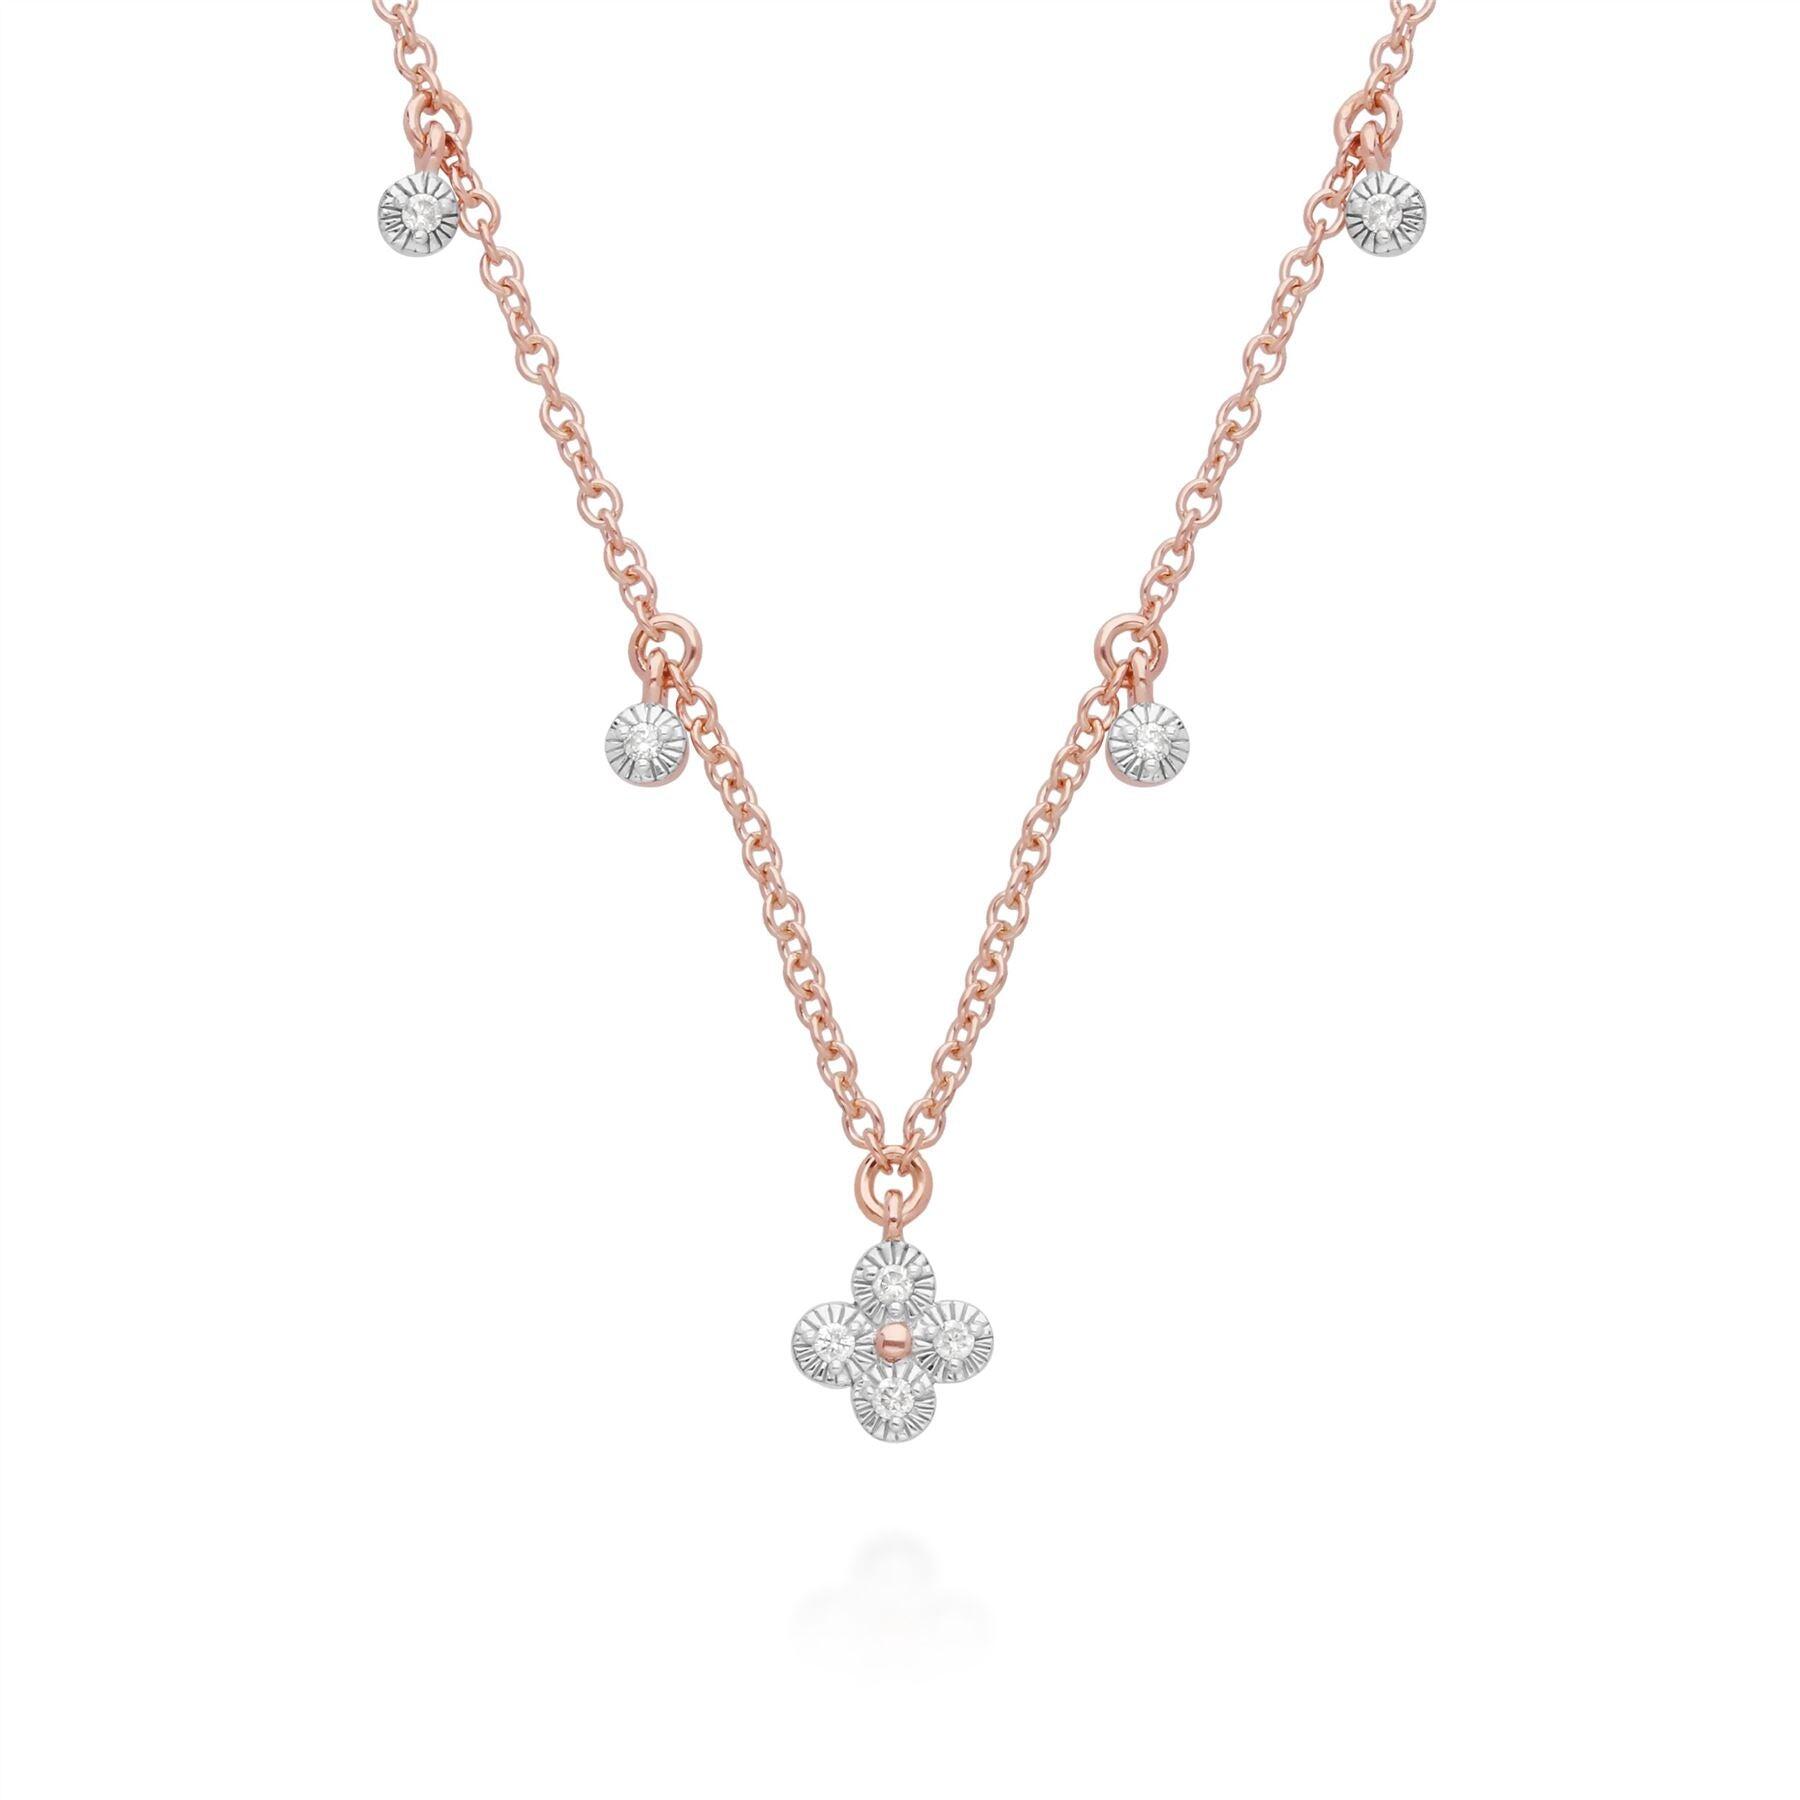 Diamond Flowers Choker Charm Necklace in 9ct Rose Gold